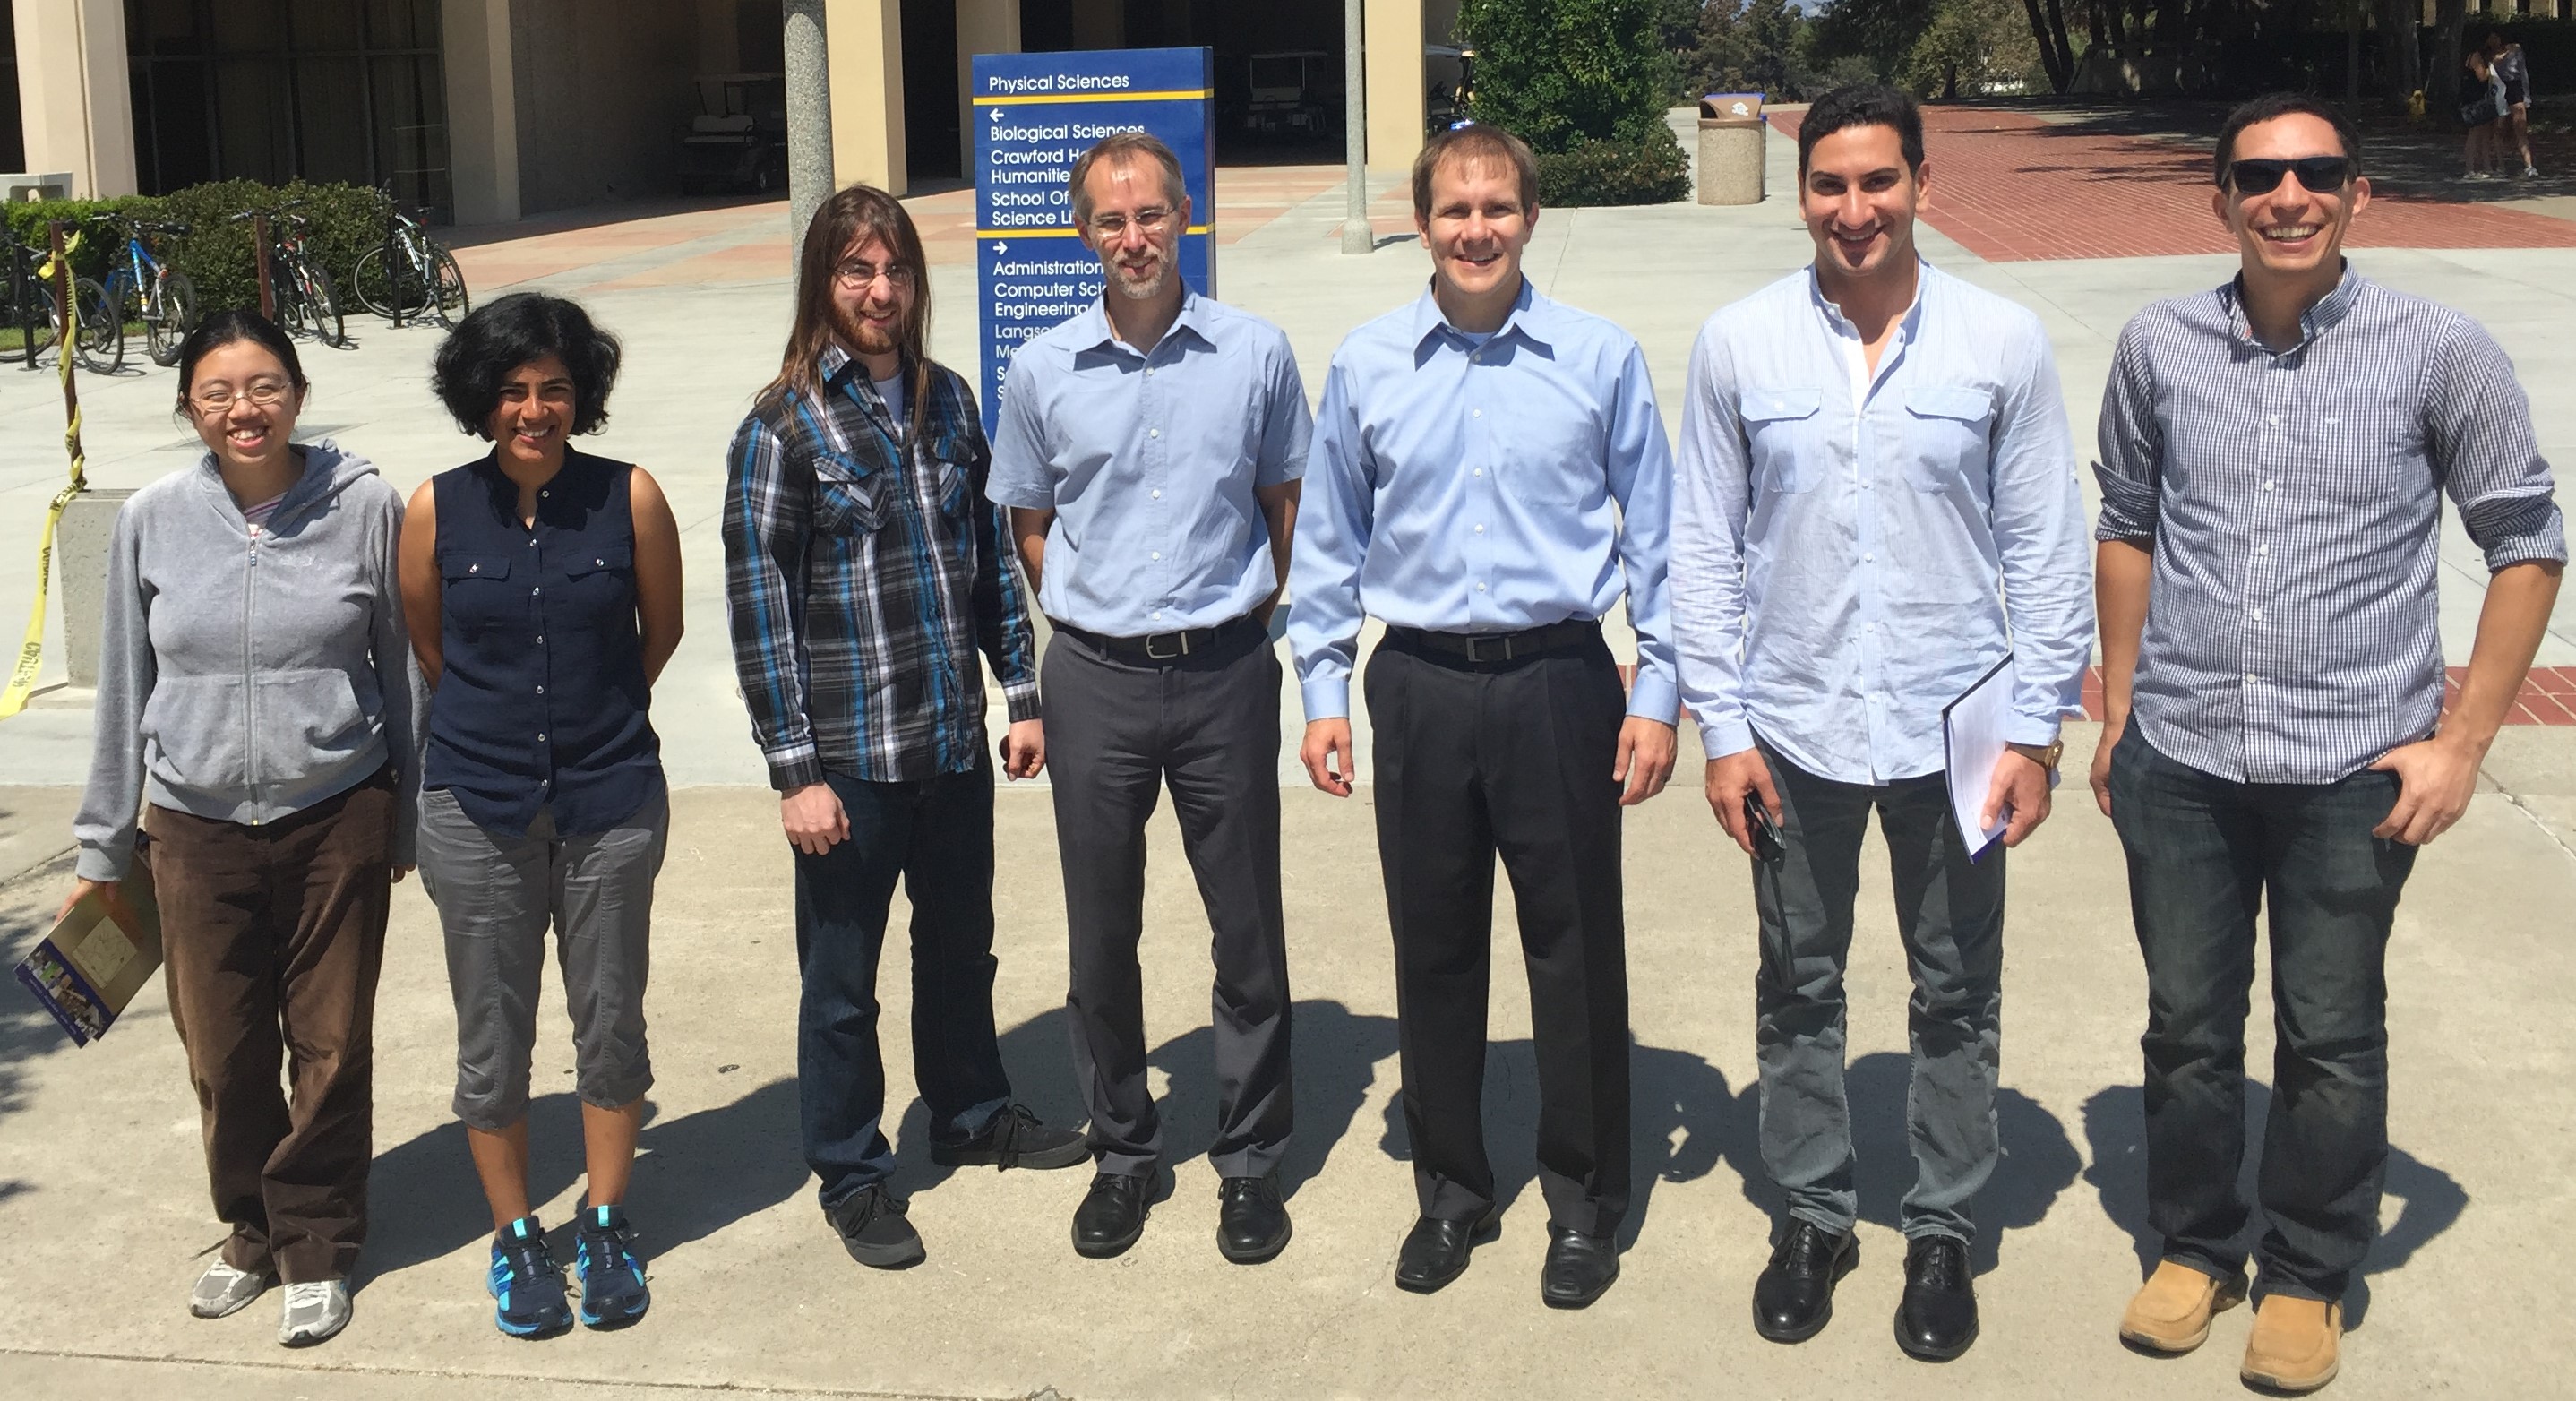 Dave Peterson and the EERE Incubator Program Team outside of Rowland Hall